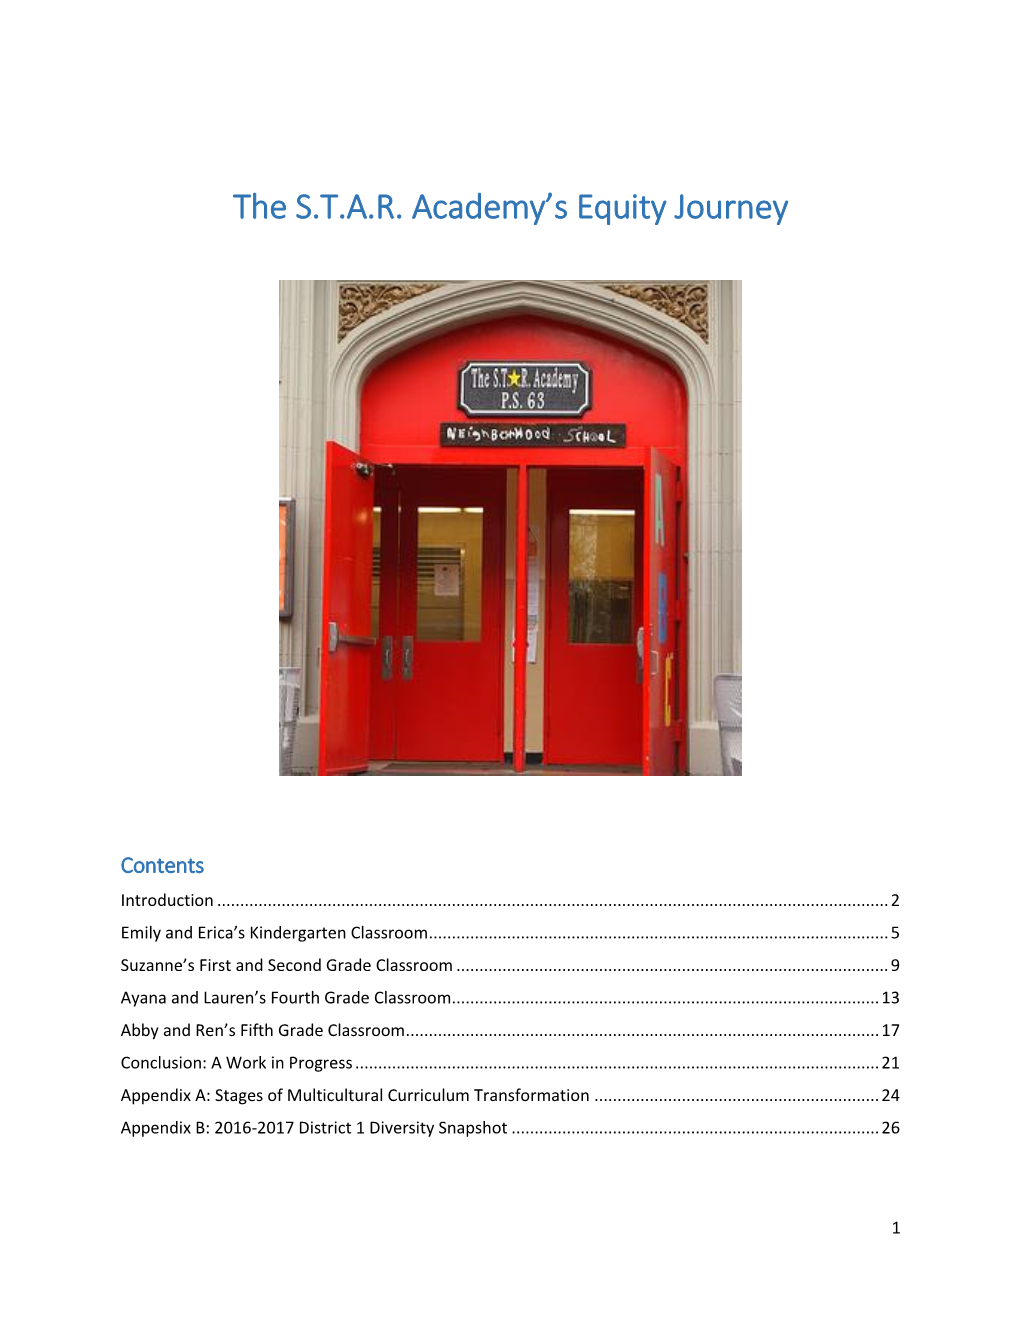 The S.T.A.R. Academy's Equity Journey